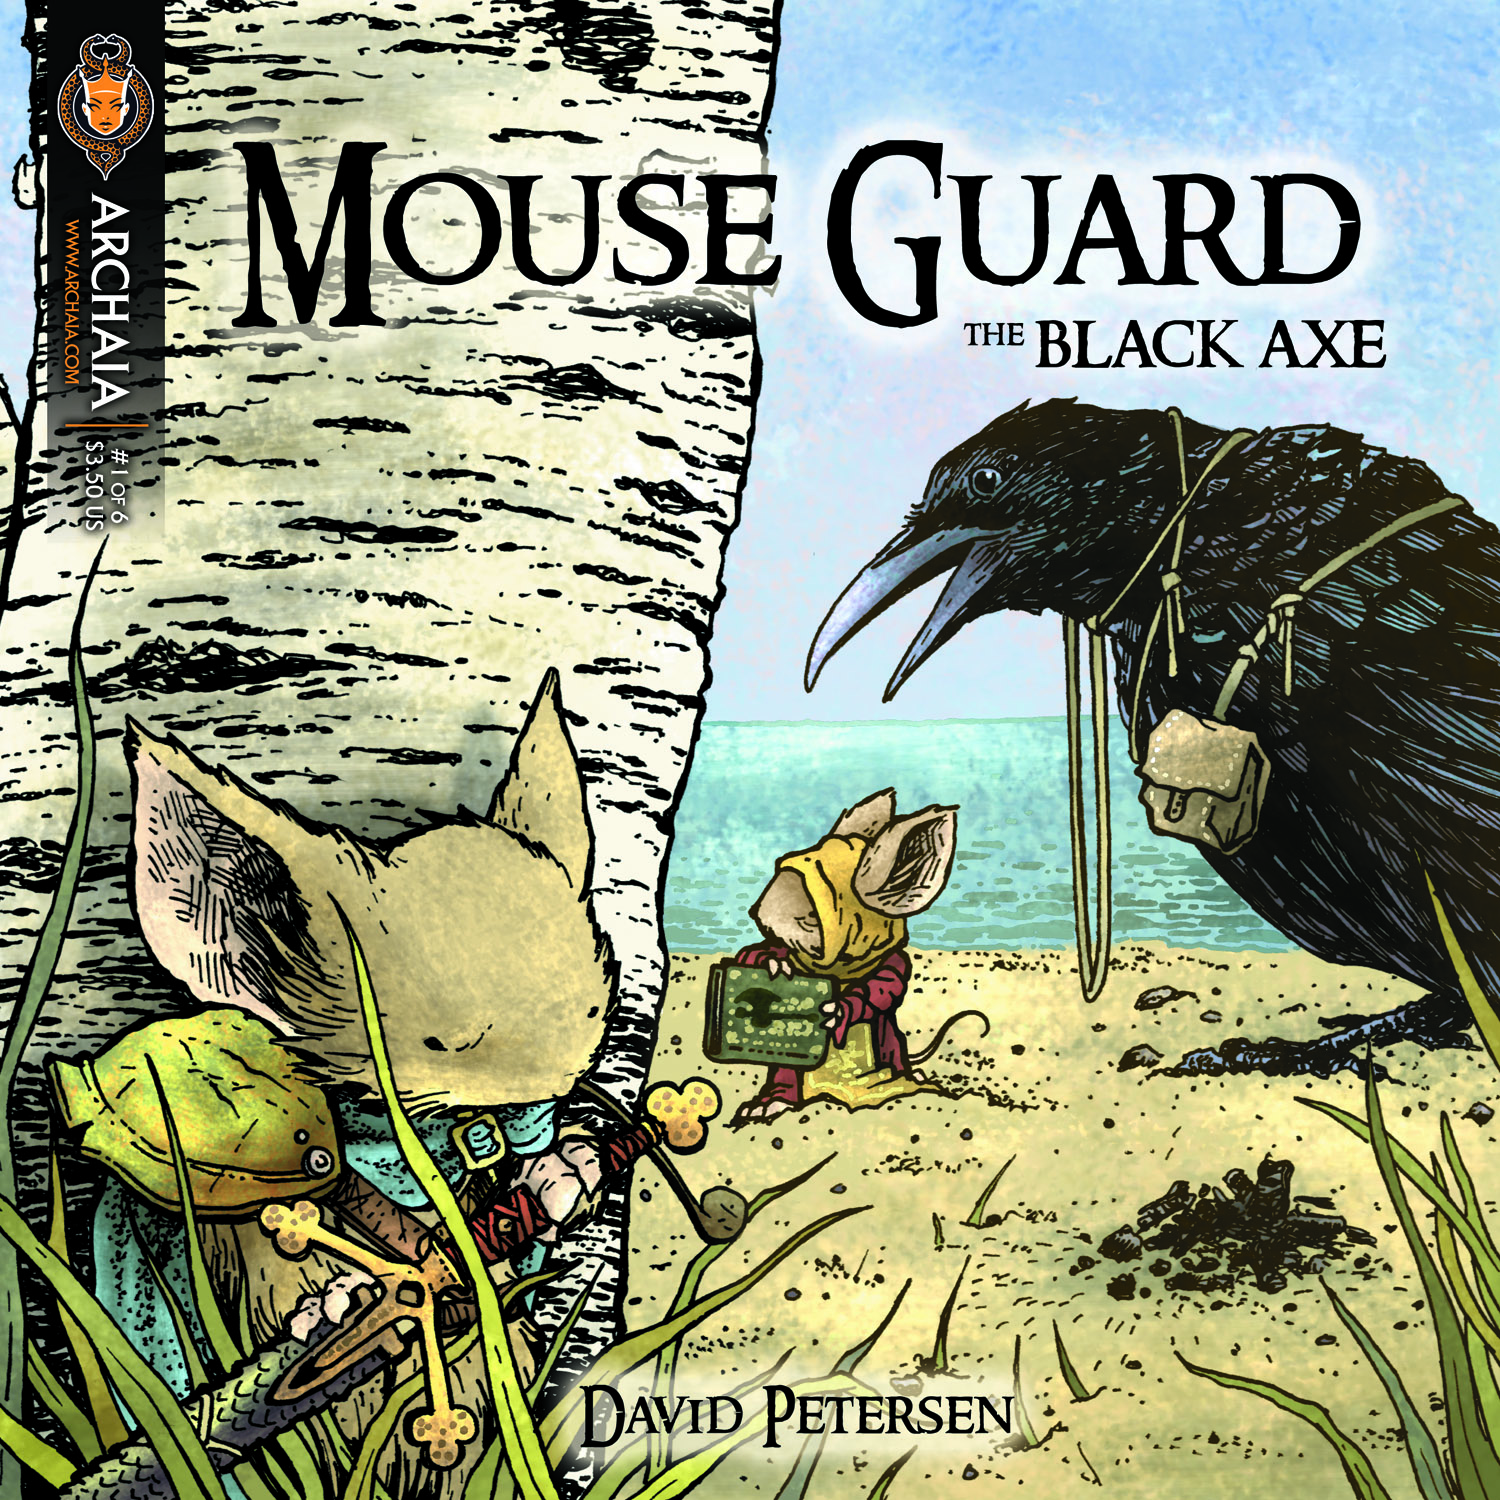 https://www.entertainmentfuse.com/images/Mouse-Guard-Black-Axe-001-Cover.jpg